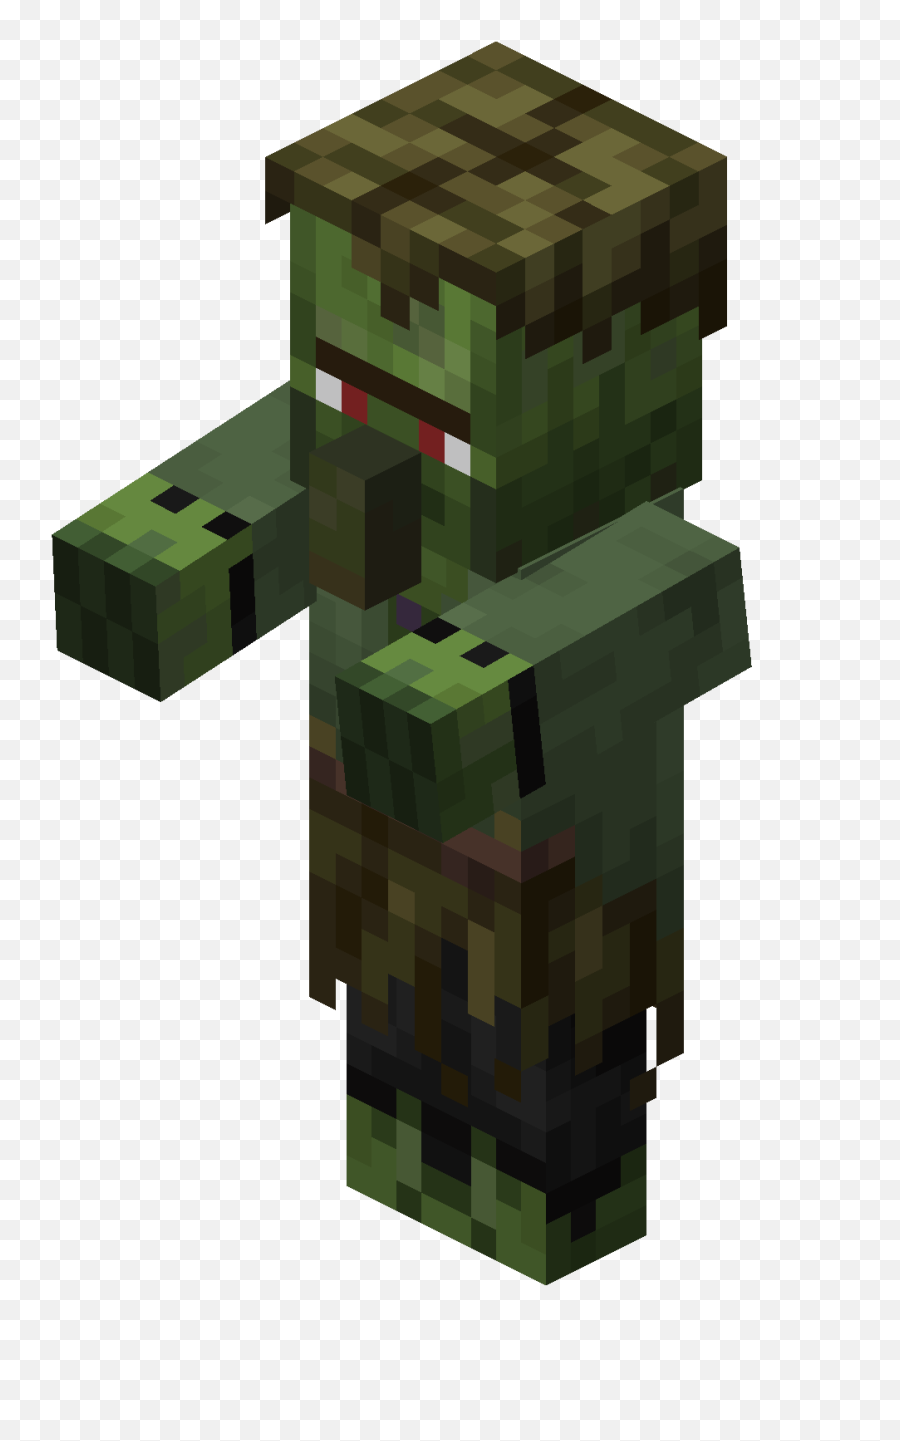 Zombie Villager - Zombie Villager Minecraft Png,Minecraft Bed Png